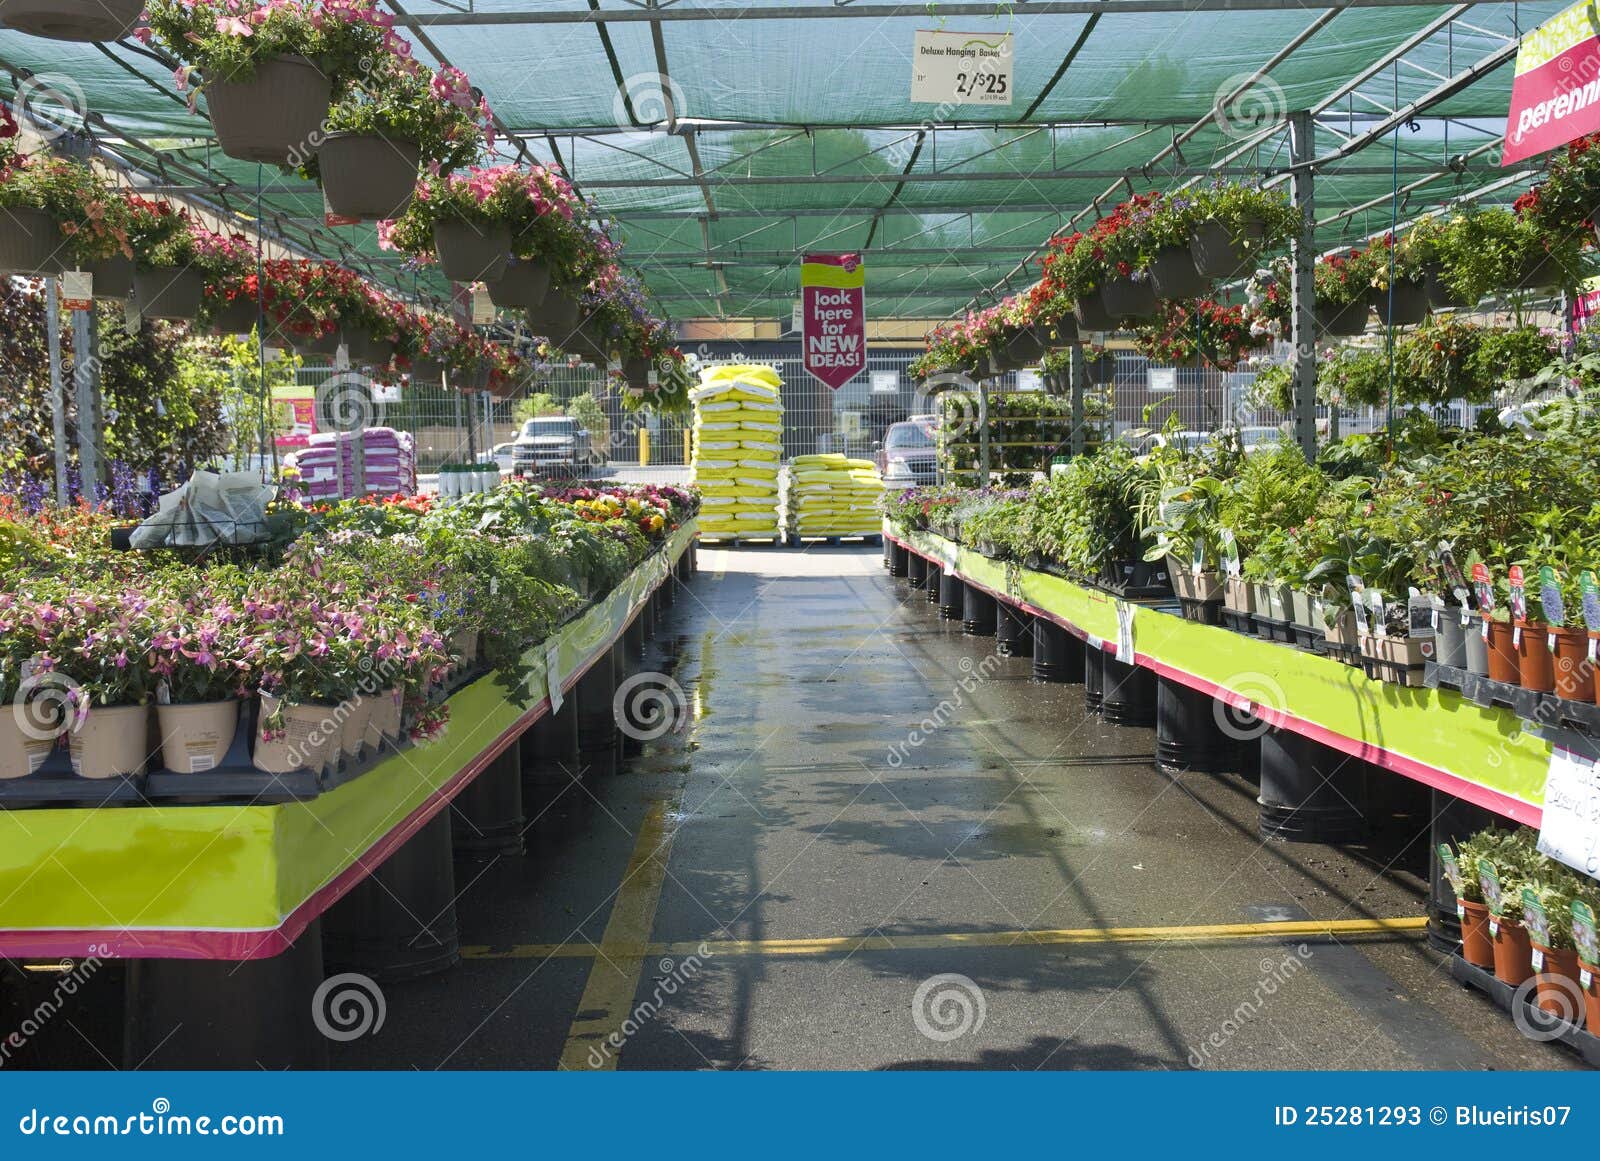 Garden Center Display Tent Stock Image Image Of Sale 25281293